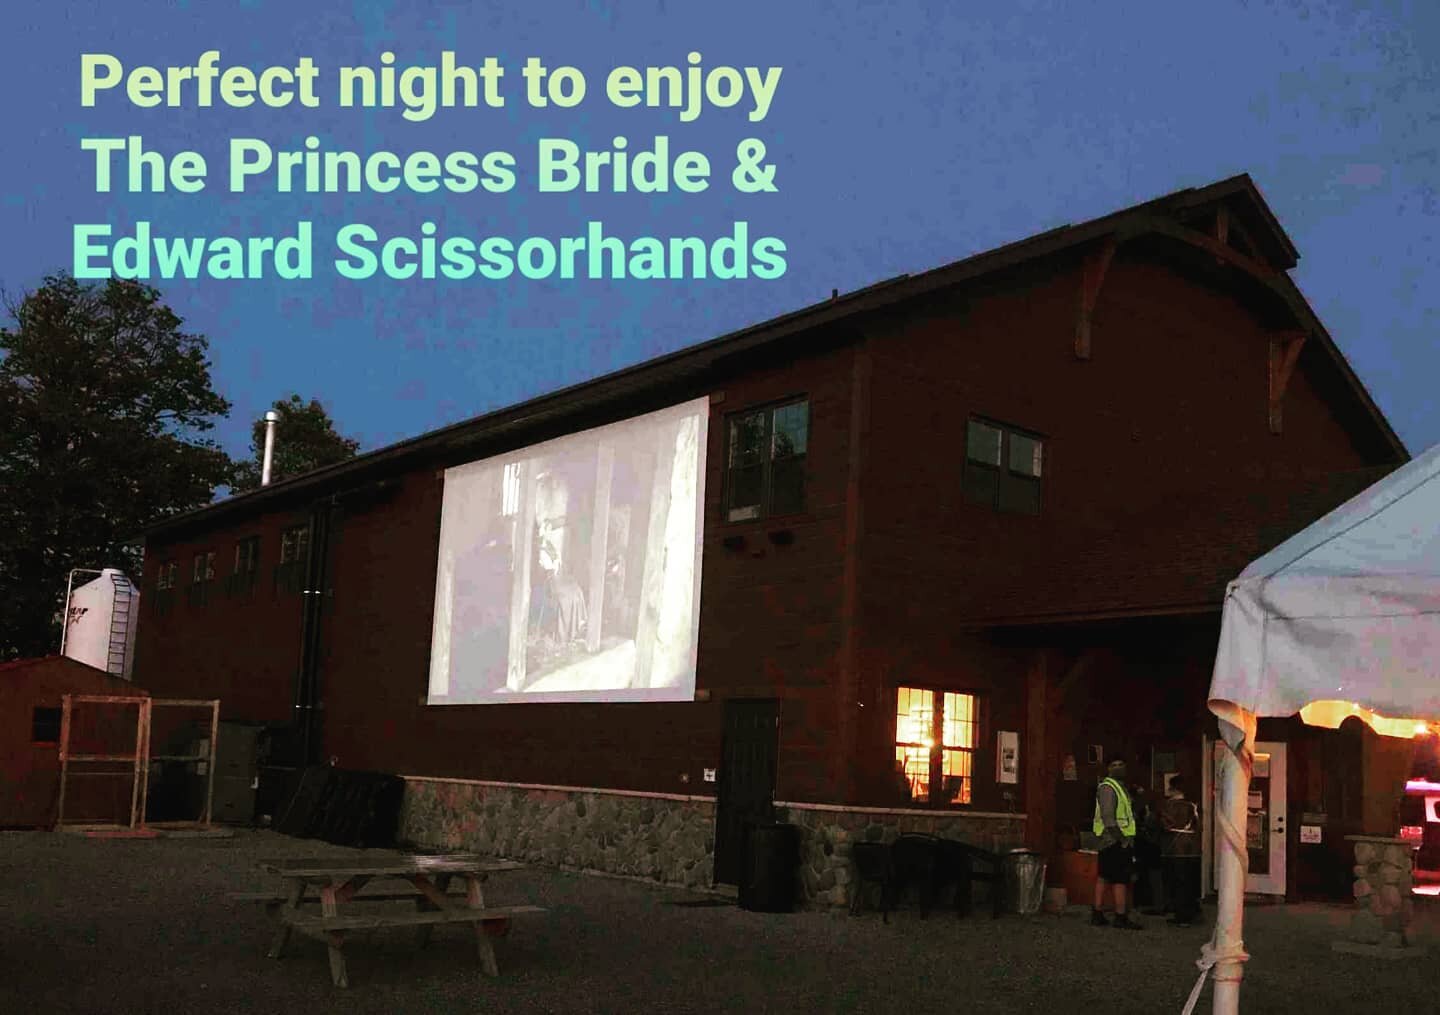 Look at The Little Pit Drive-In for future films as tonight is sold out! 
.
.
.
.
#driveinmovies #haliburton #craftbrewery #craftbeer #theprincessbride #edwardscissorhands #ontariocraftbeer #onhighlands #supportlocal #buycloseby